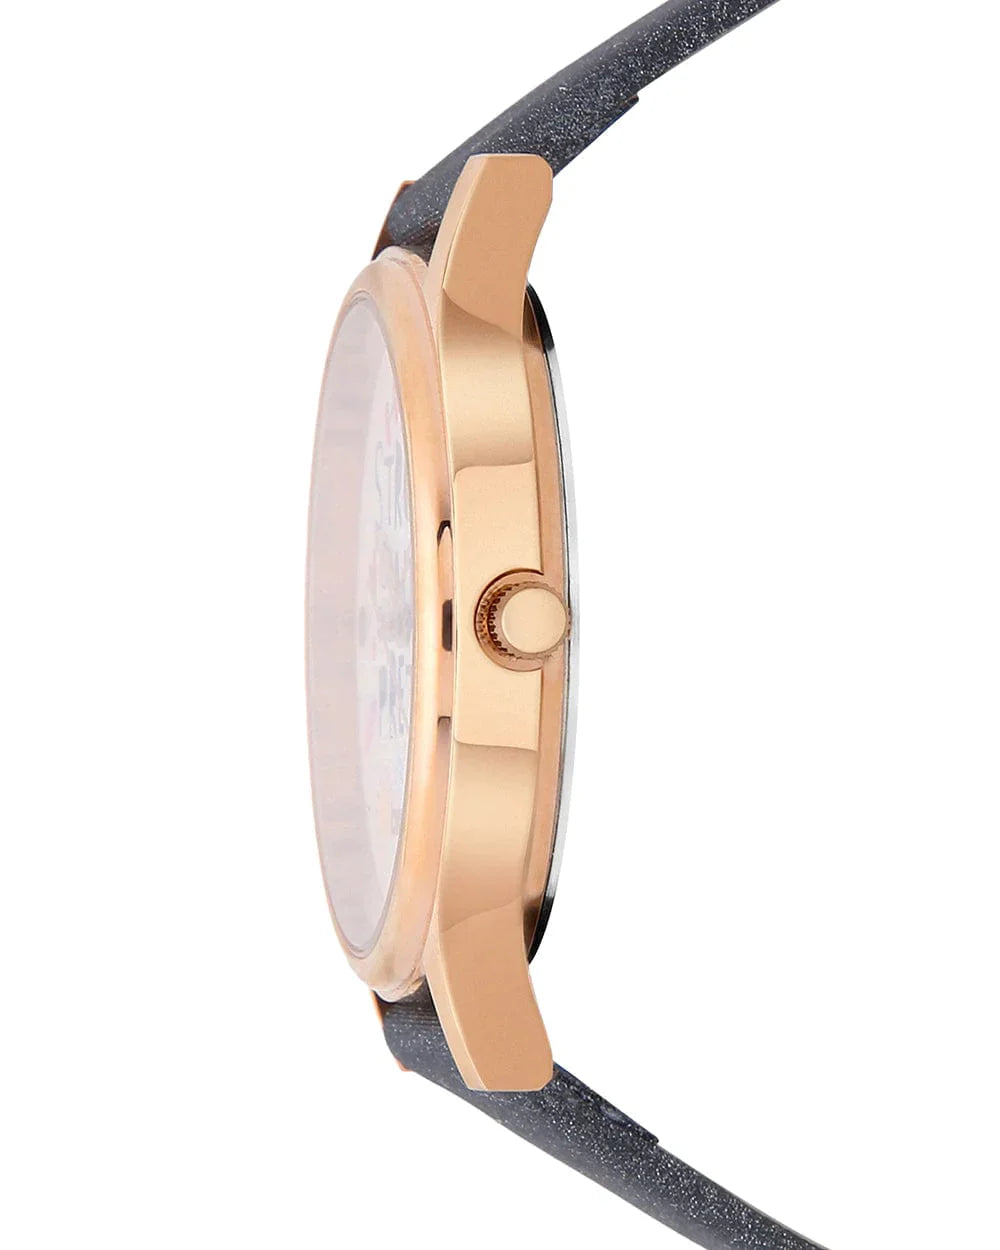 Women's Teal By Strong Is The New Pretty Wrist Watch - Chumbak